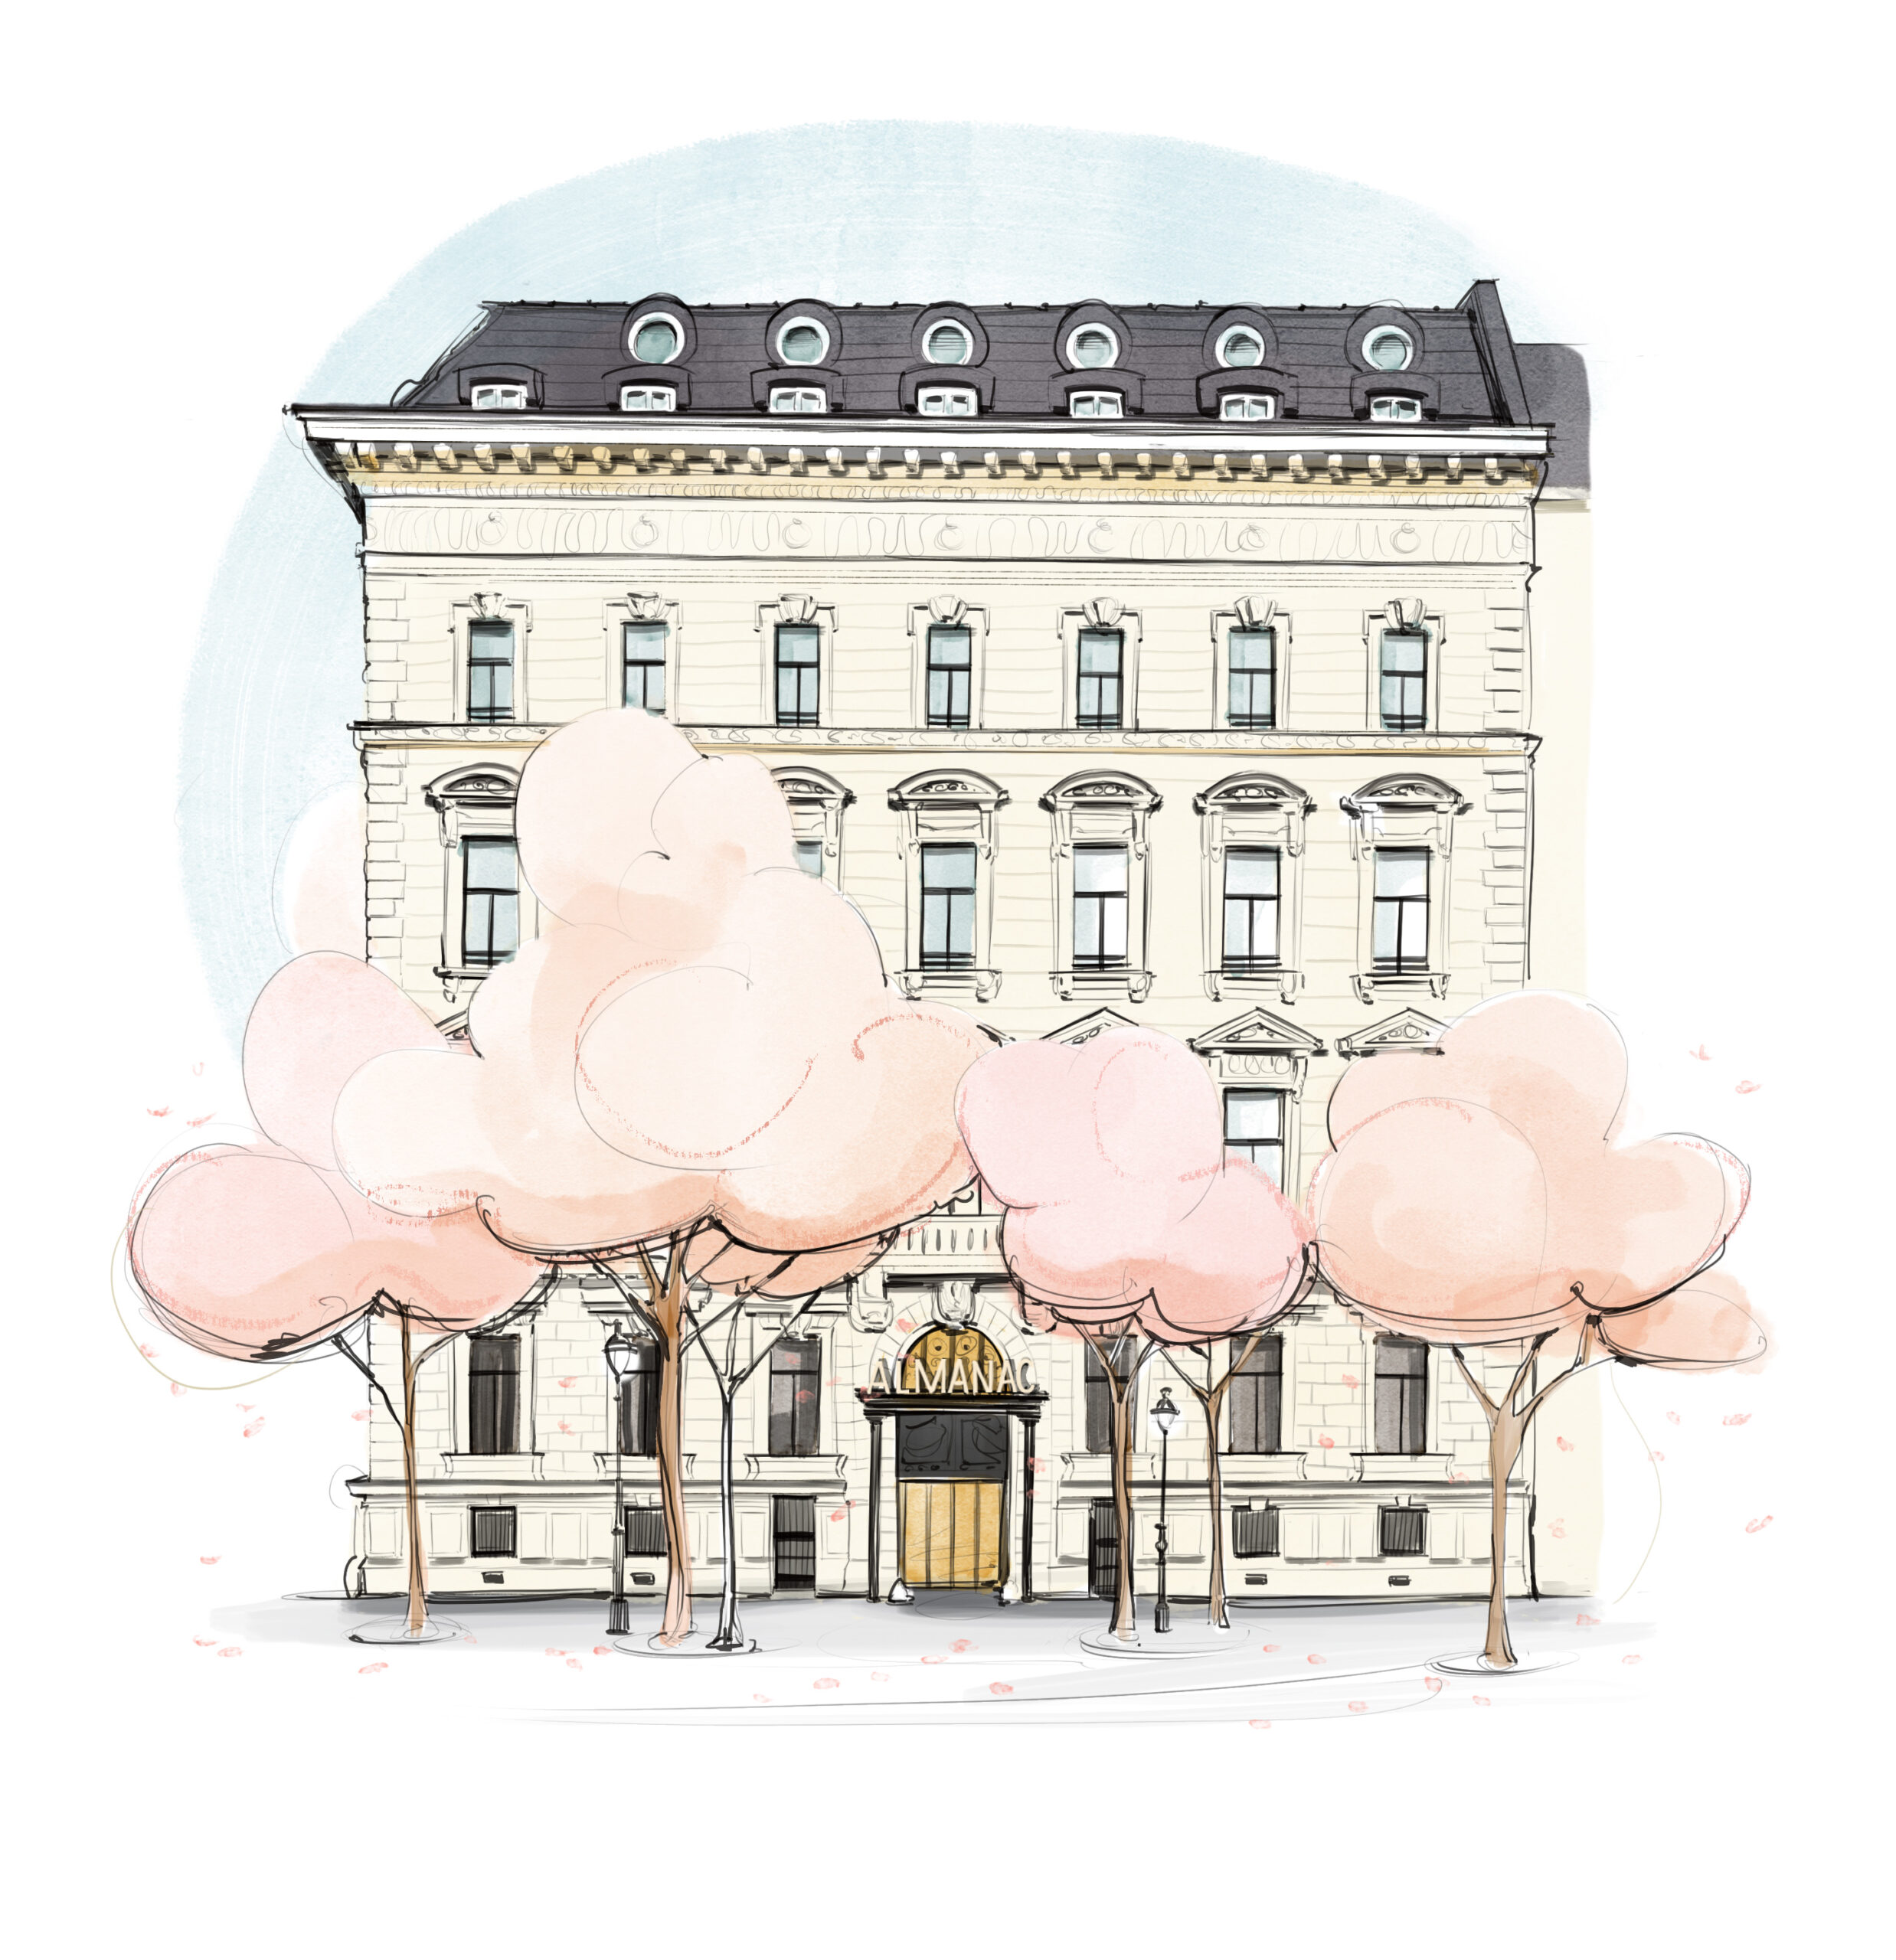 Almanac Vienna – Illustrations for the luxury boutique hotel